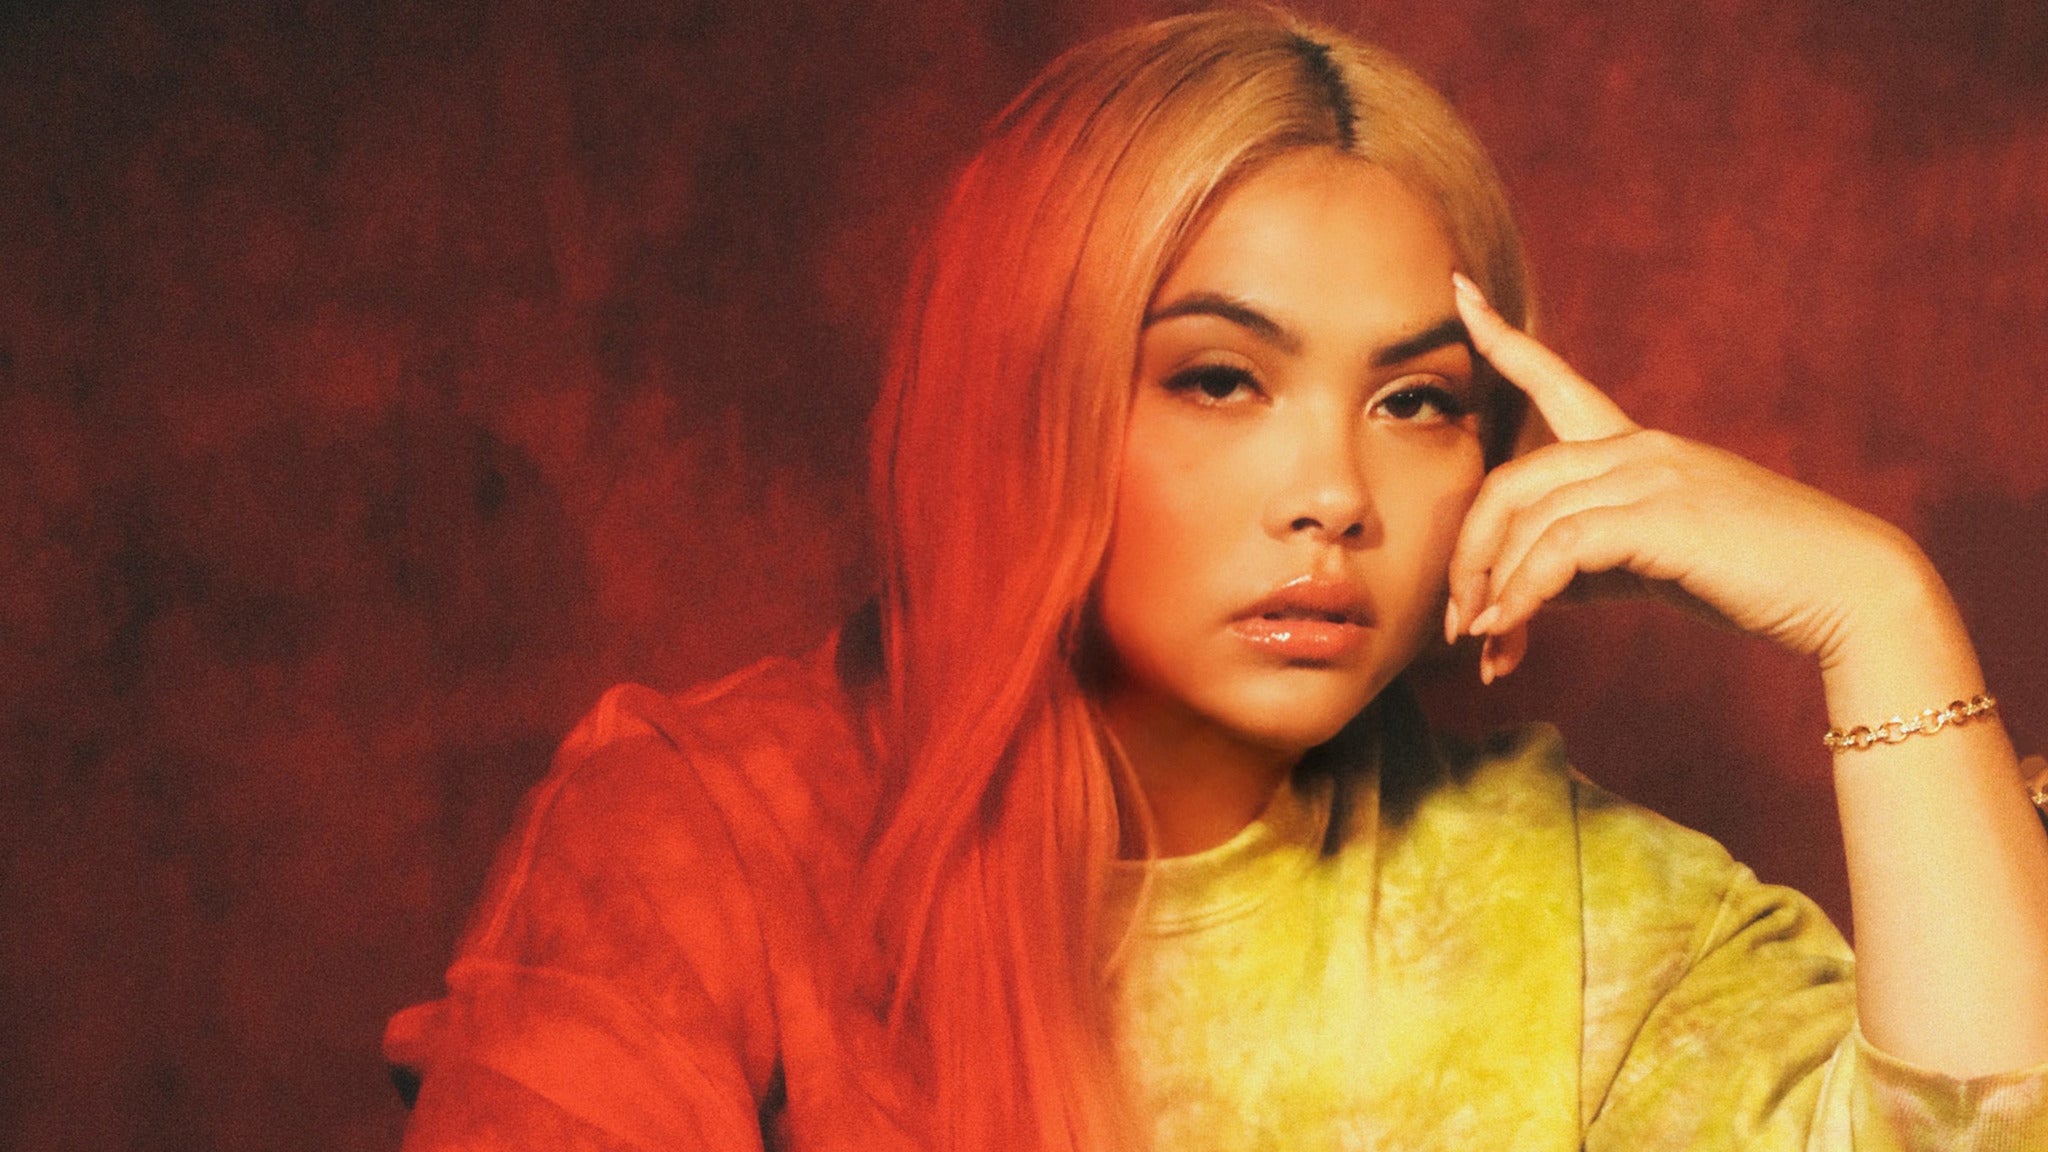 Hayley Kiyoko - Expectations North American Tour in Boston promo photo for Live Nation presale offer code